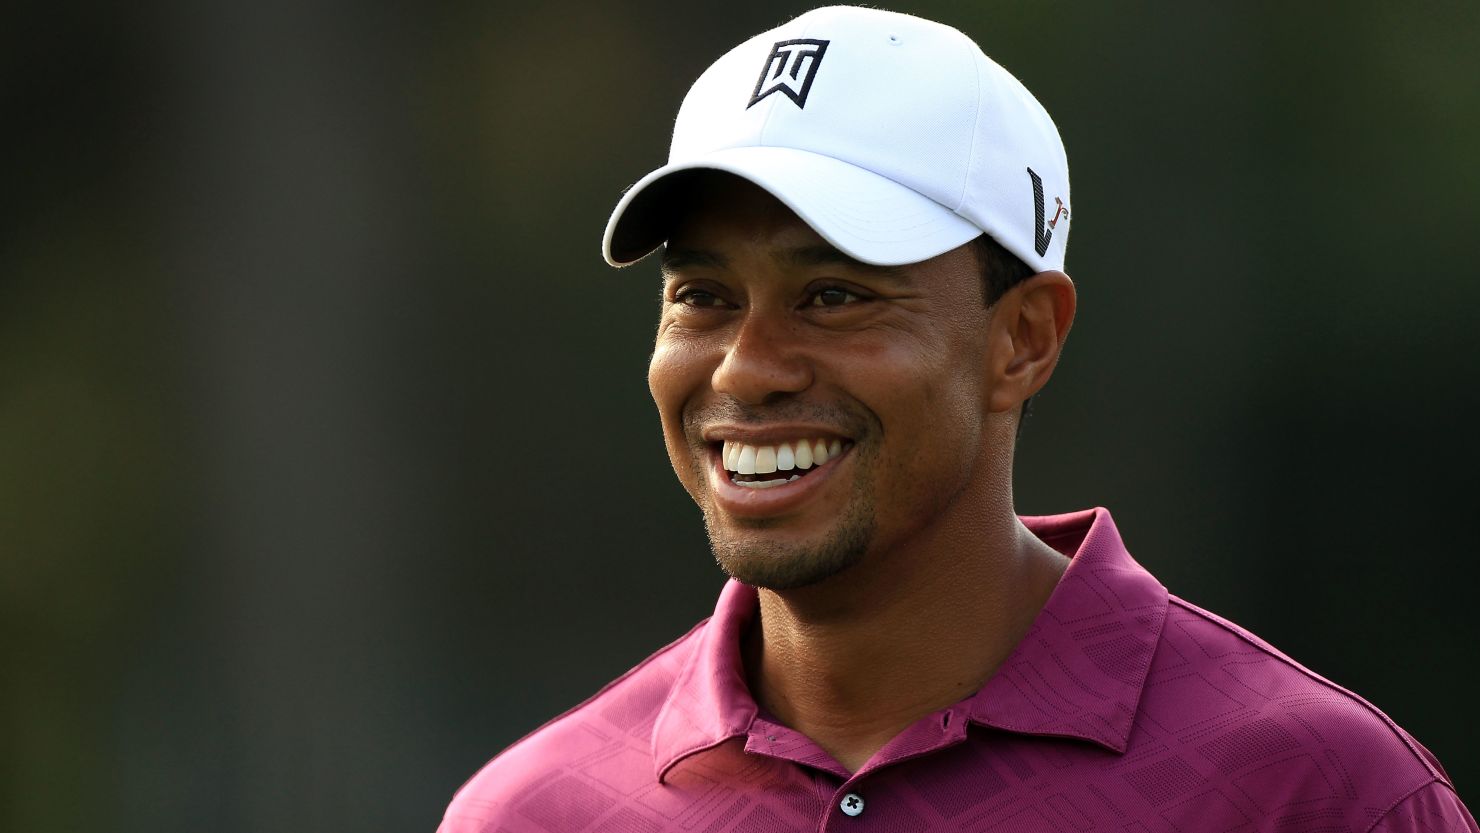 Former world No. 1 Tiger Woods still has plenty to smile about off the golf course despite his slump in form.